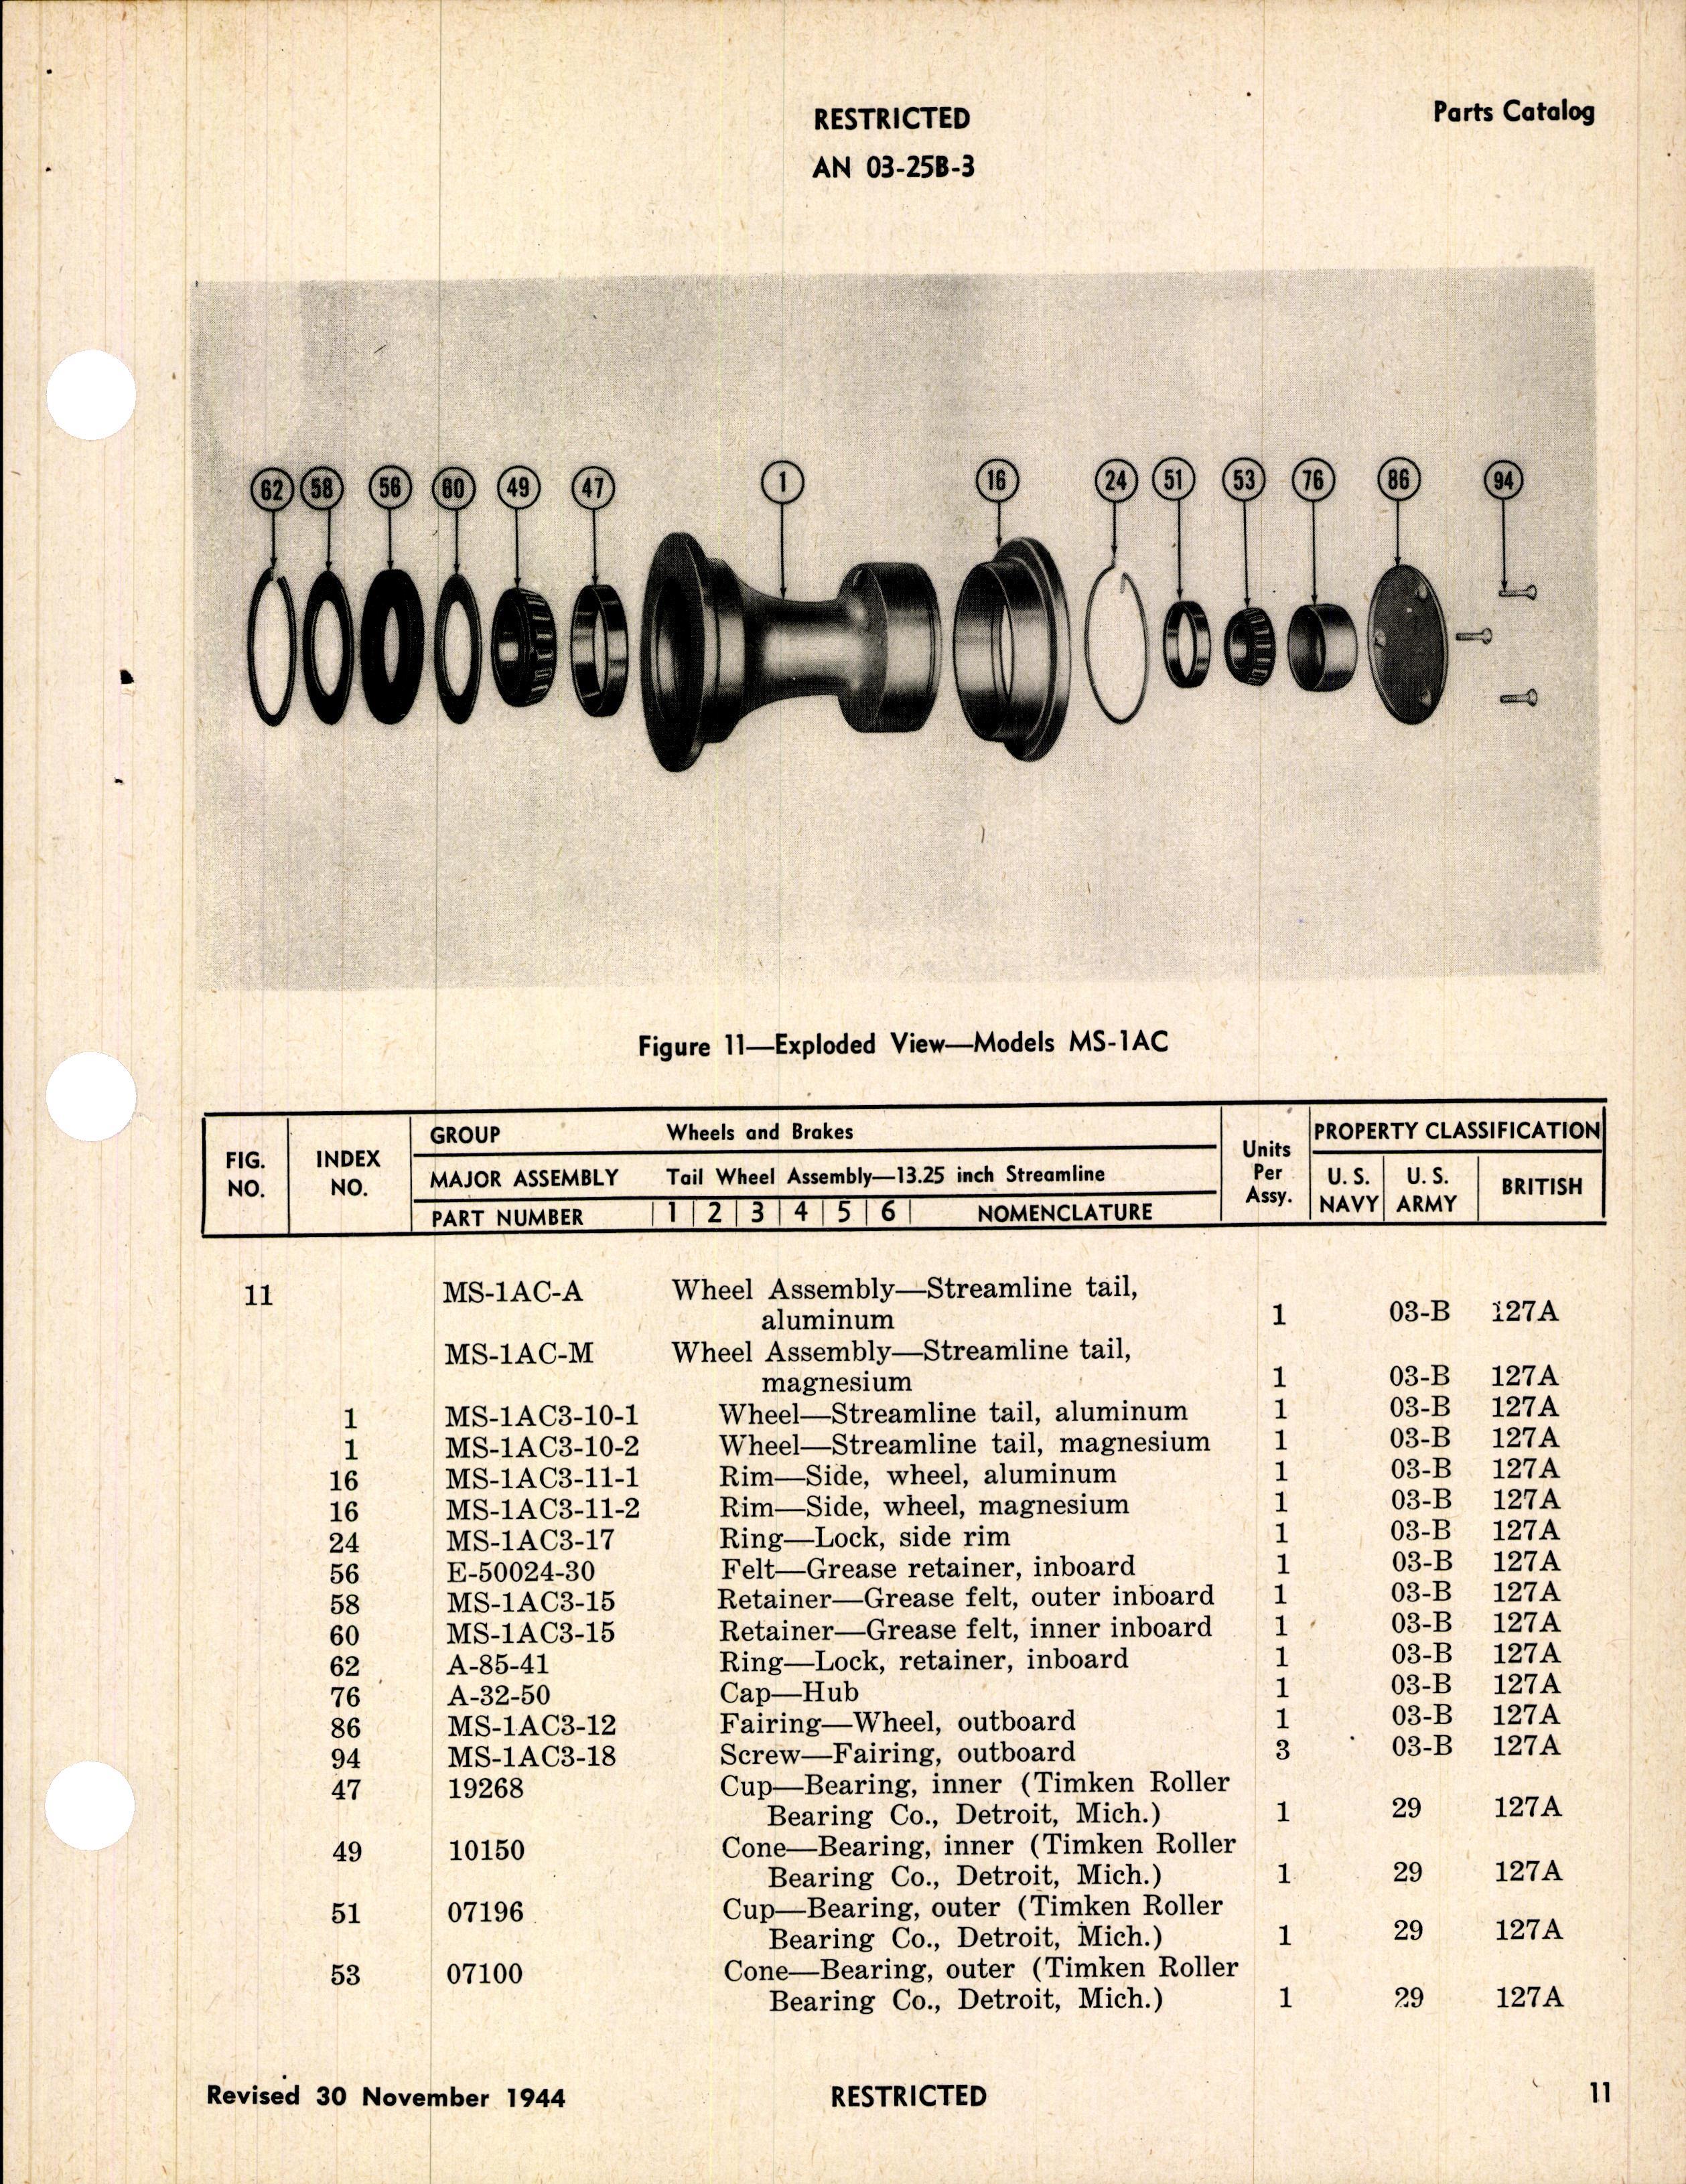 Sample page 5 from AirCorps Library document: Handbook of Instructions with Parts Catalog for Nose and Tail Wheels